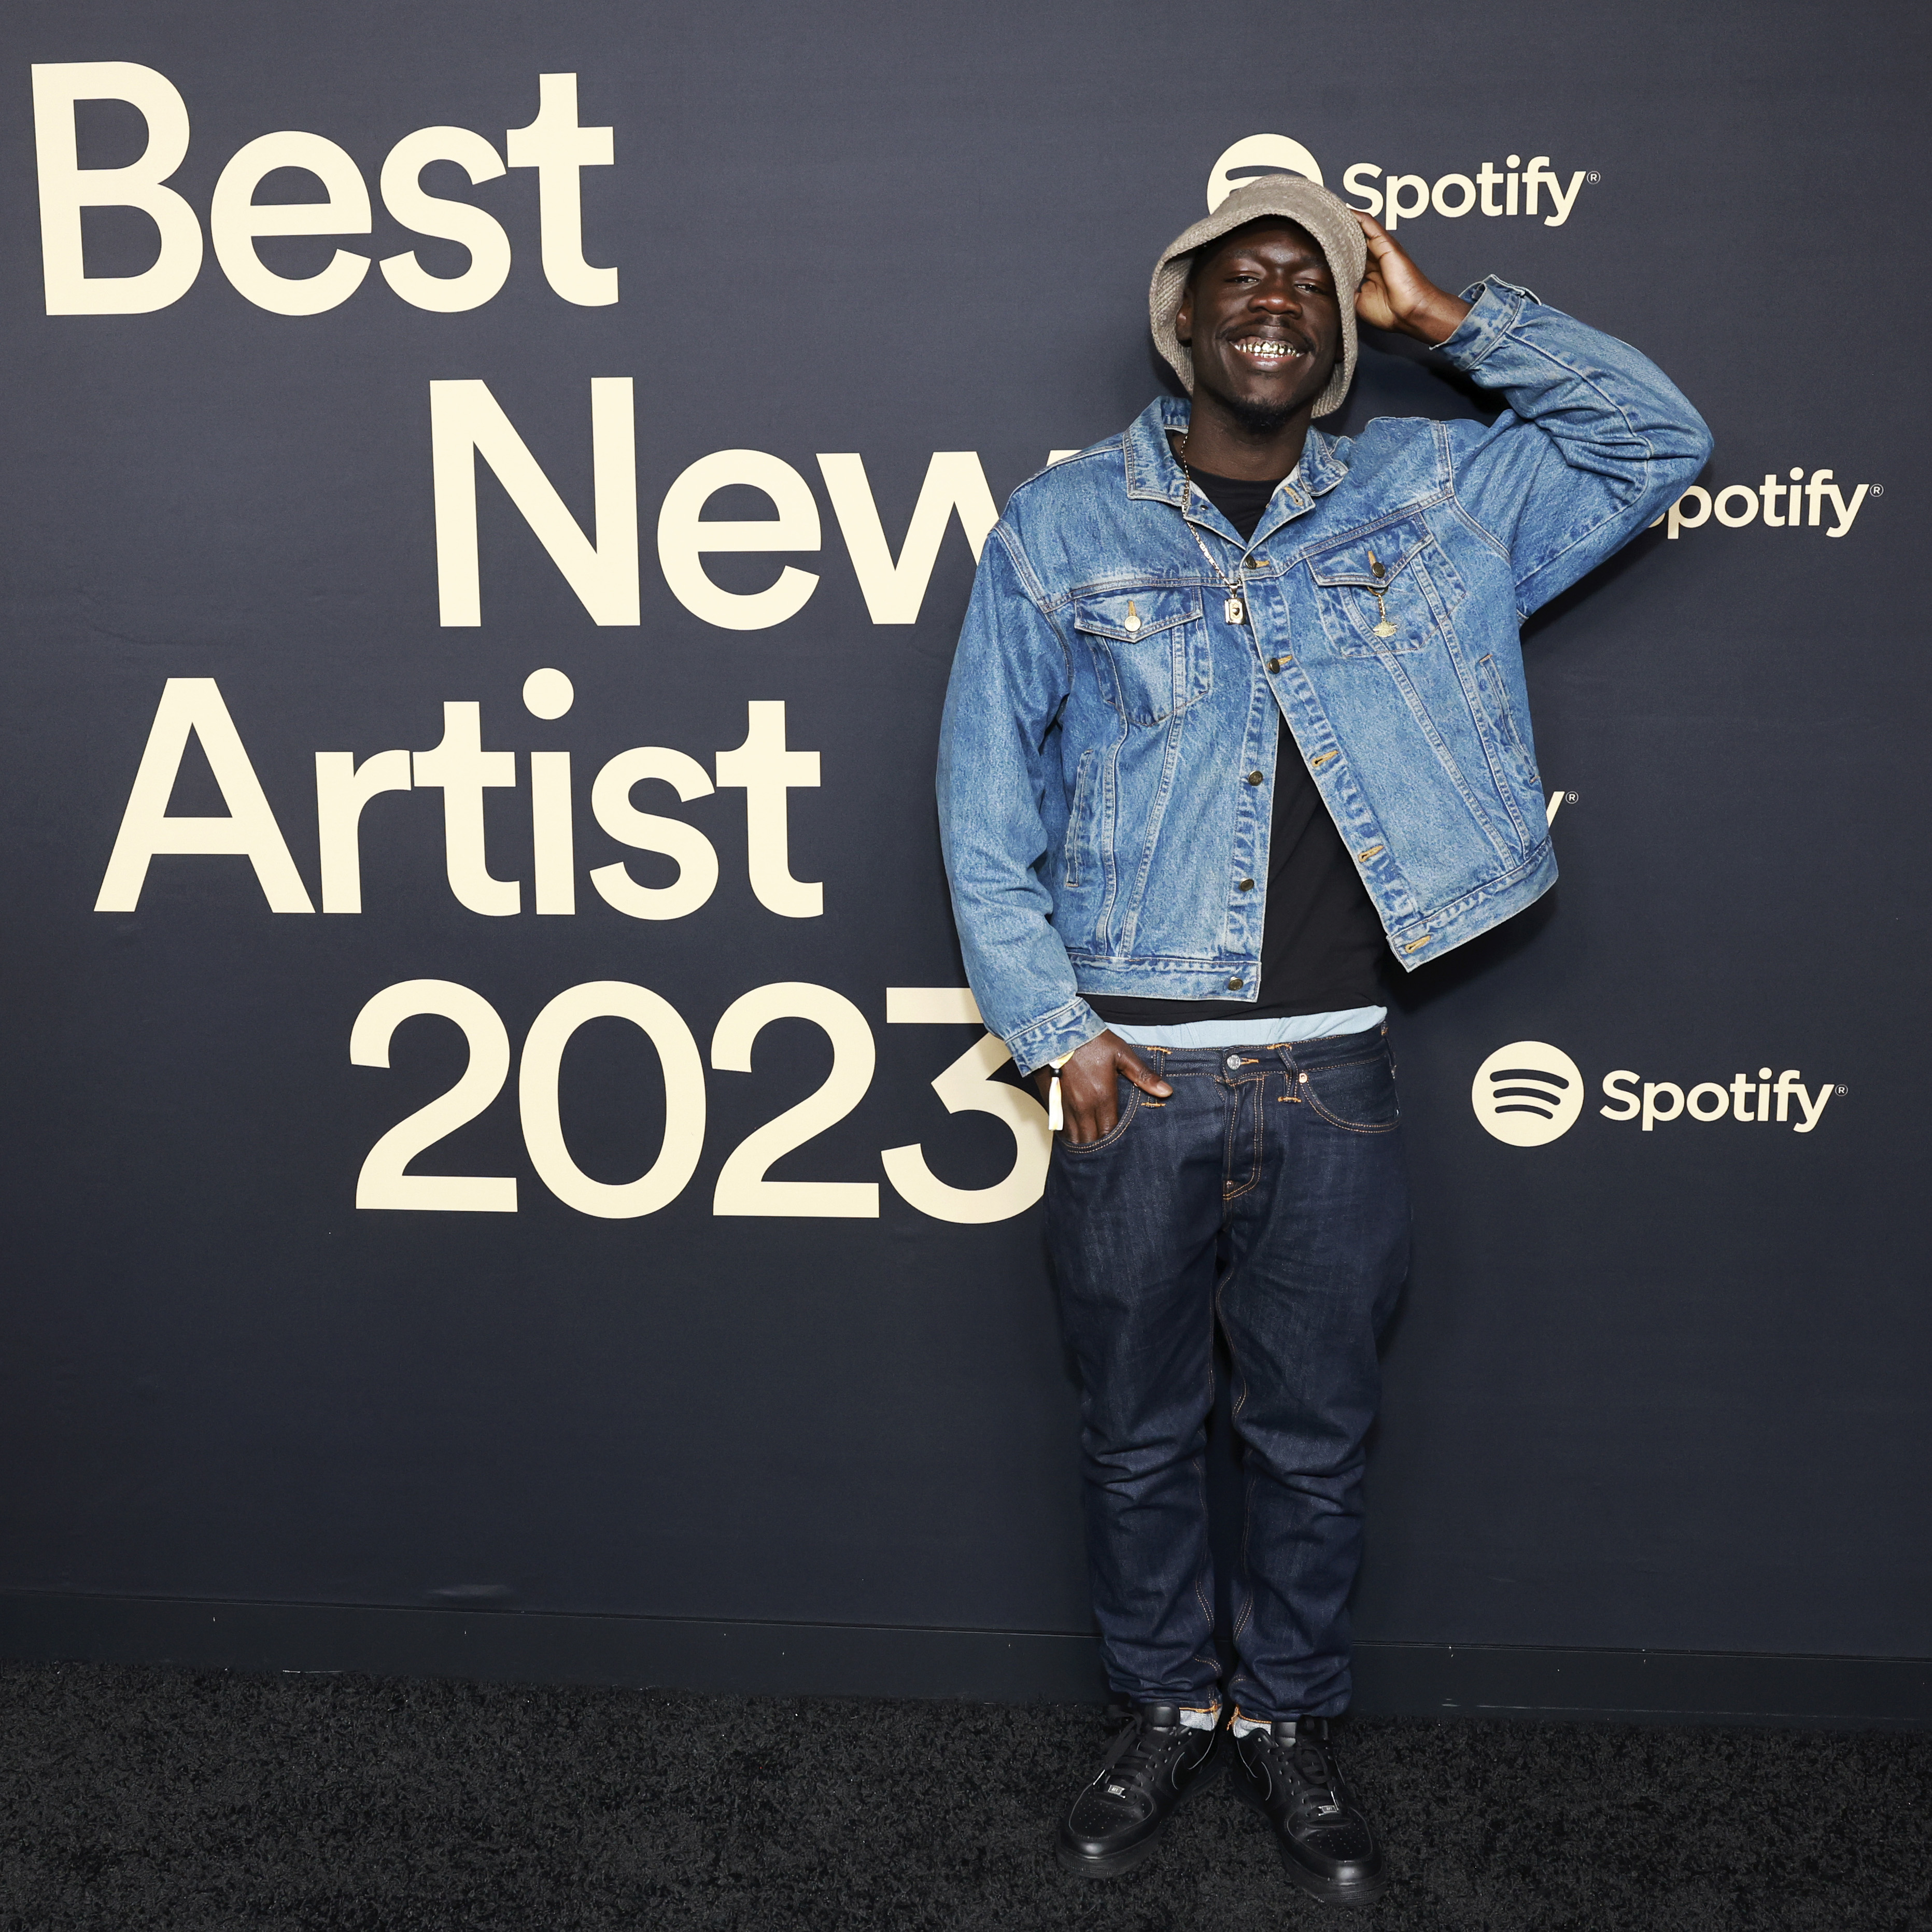 Spotify's 2023 Best New Artist Party